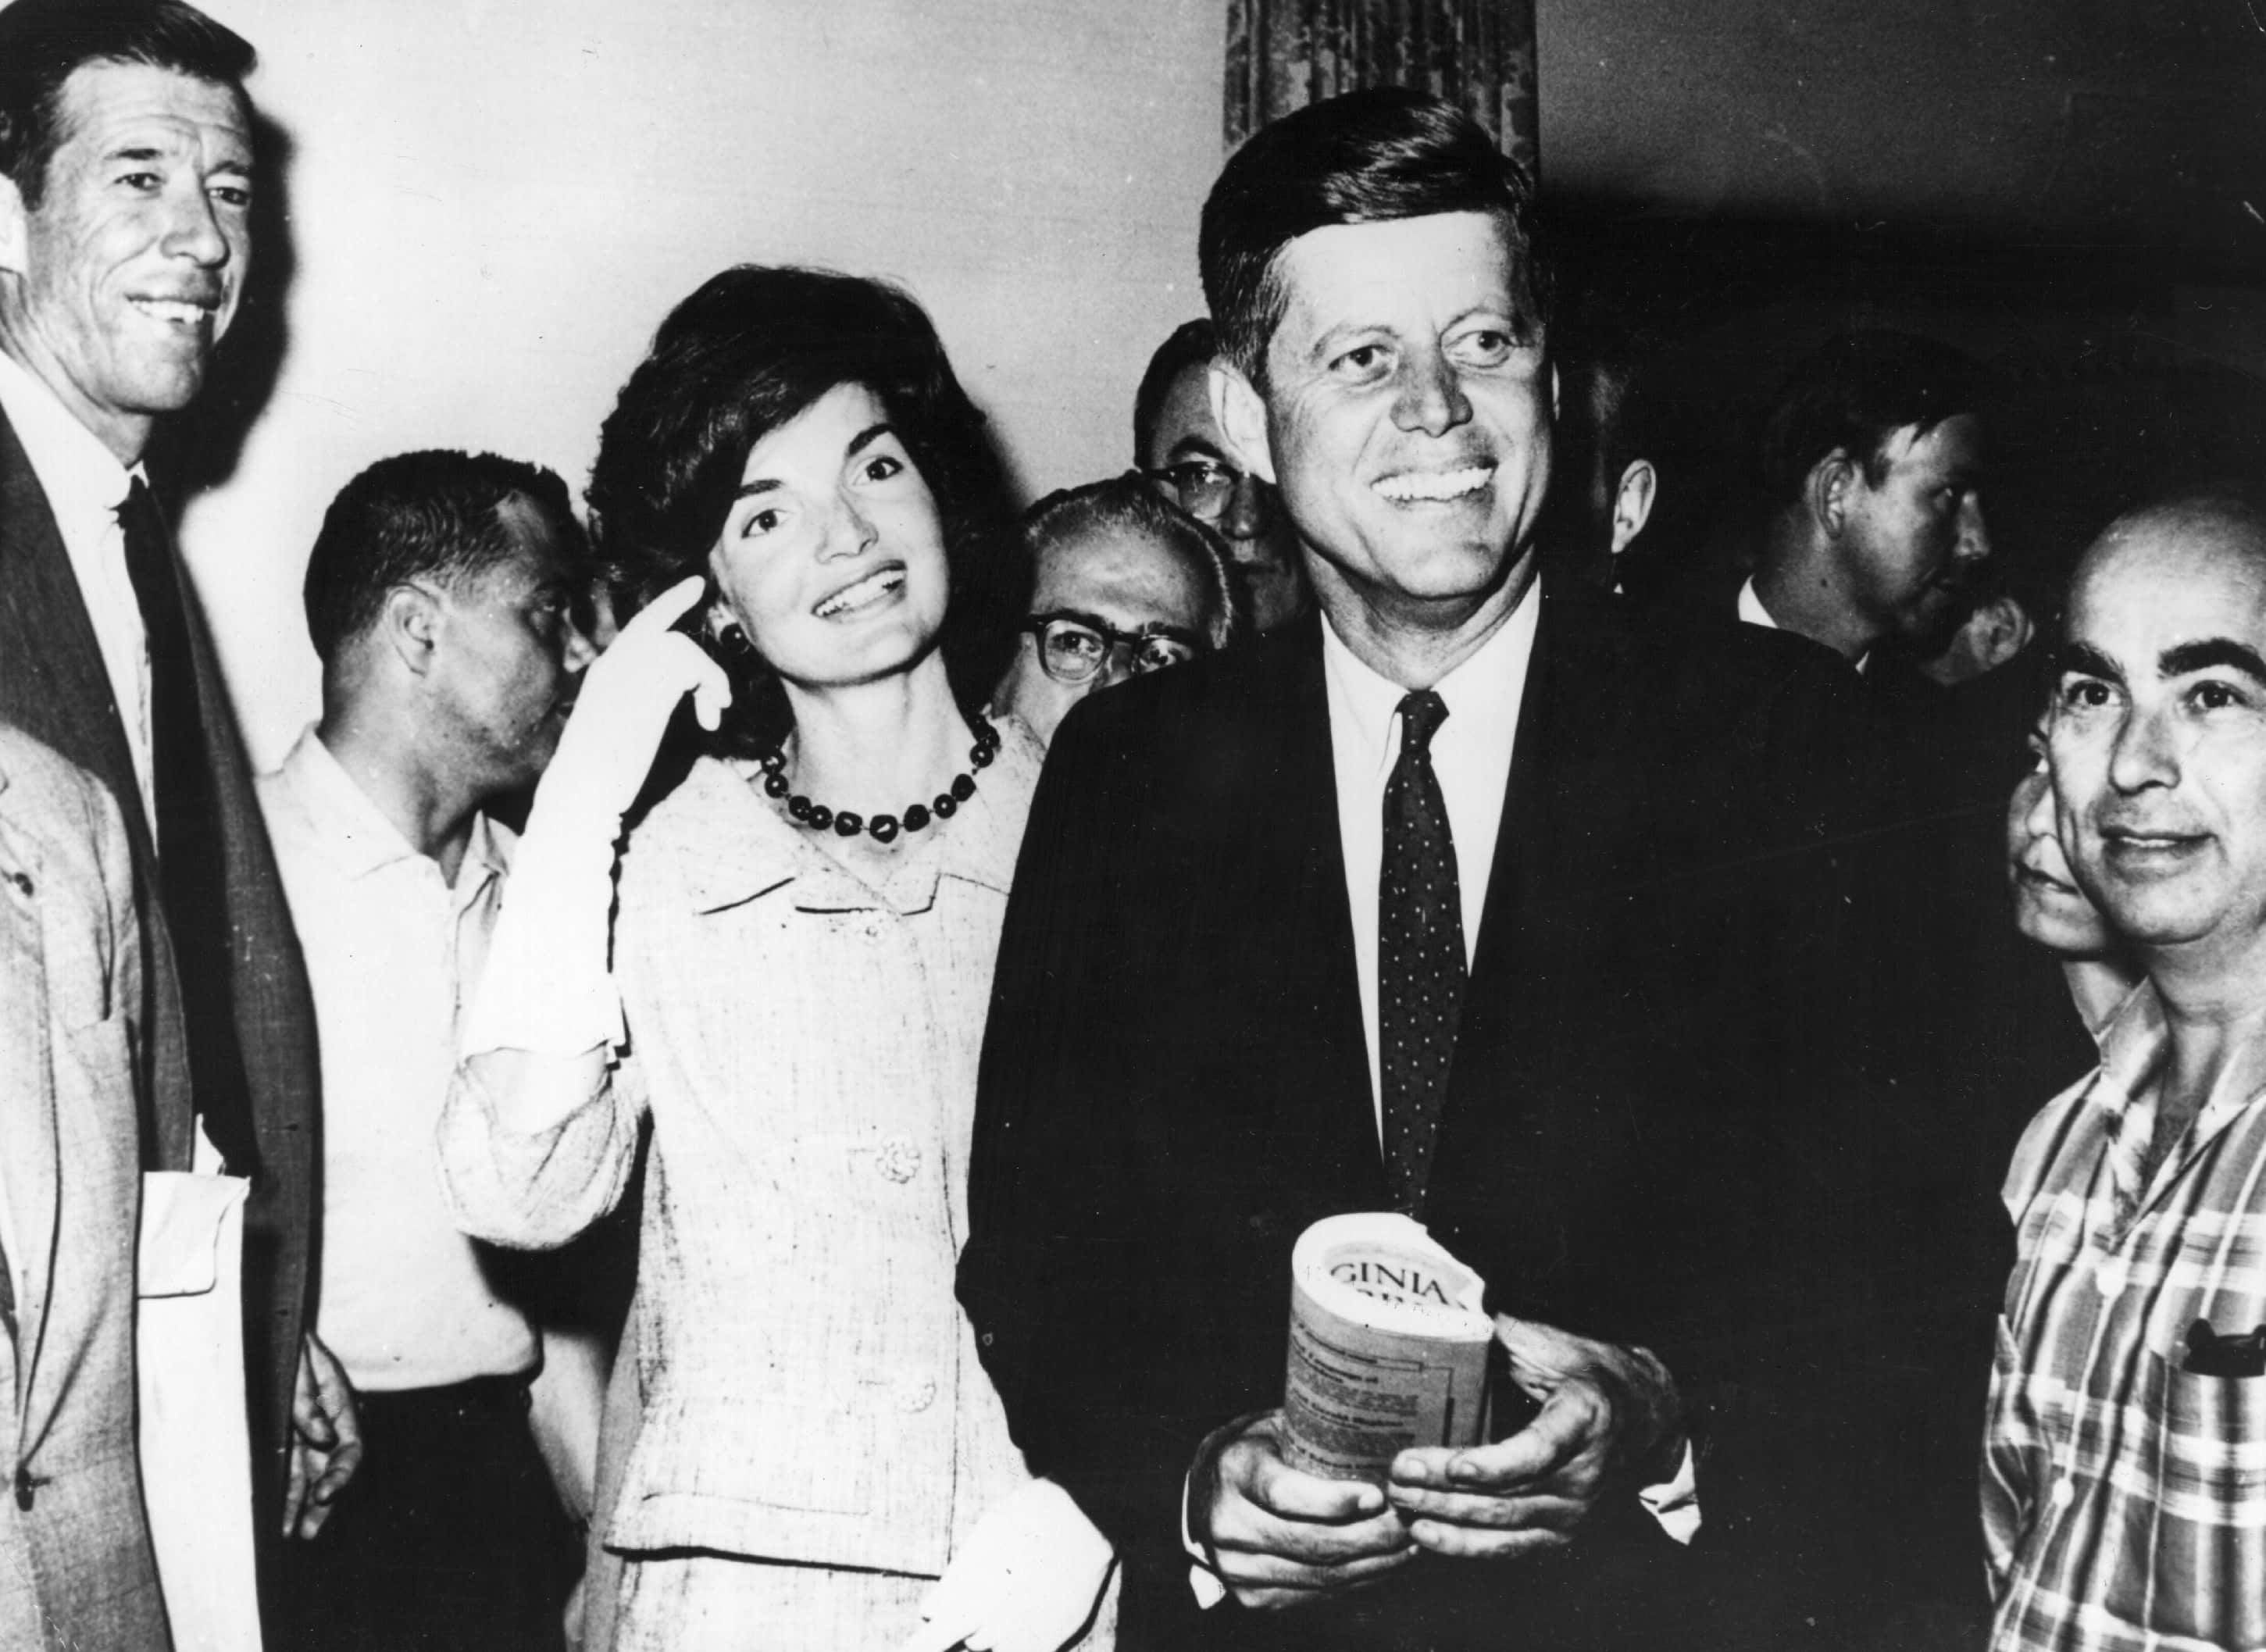 Jackie Kennedy Facts